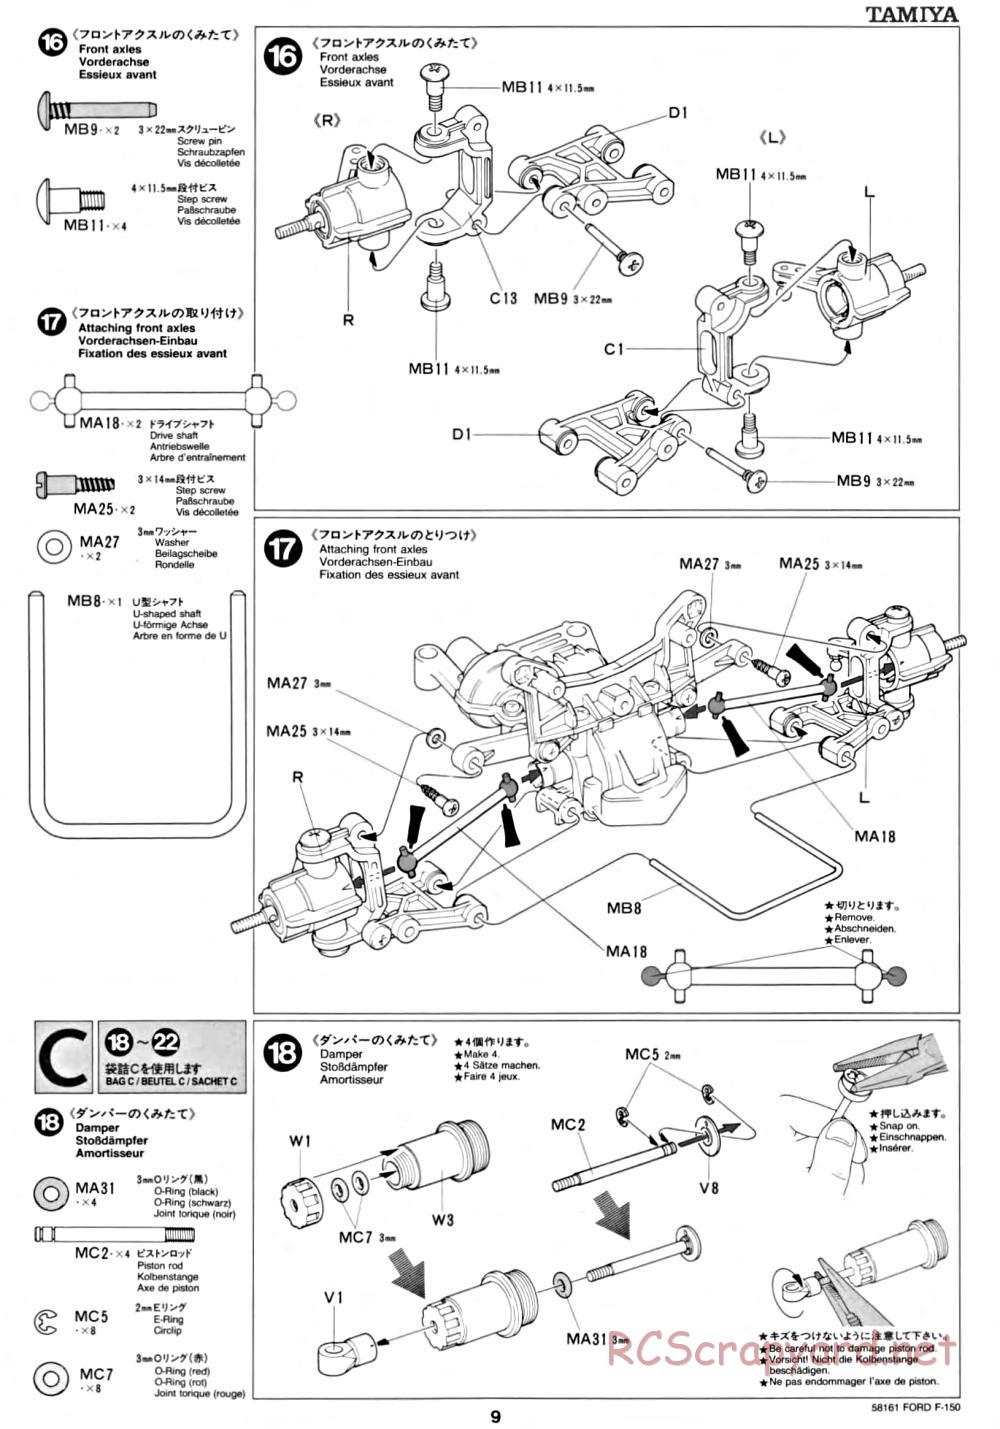 Tamiya - Ford F-150 Truck Chassis - Manual - Page 9